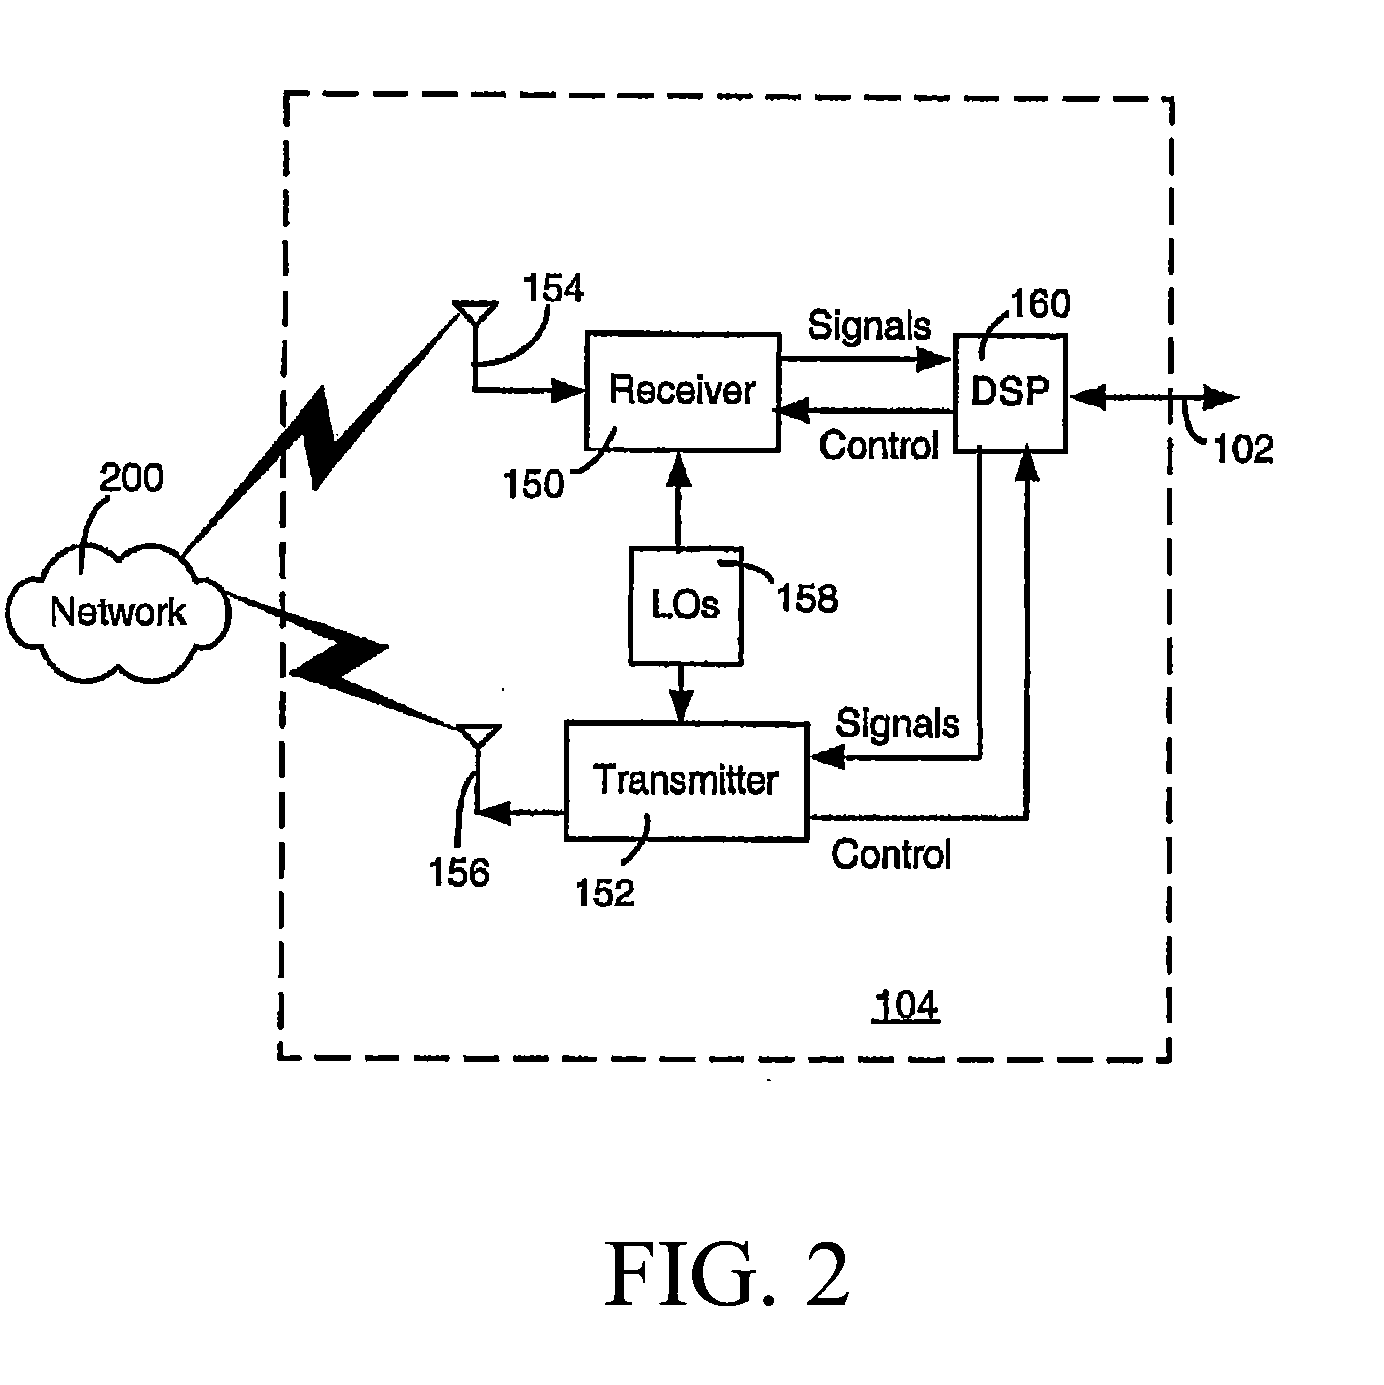 System, method and mobile device for management of wireless connections